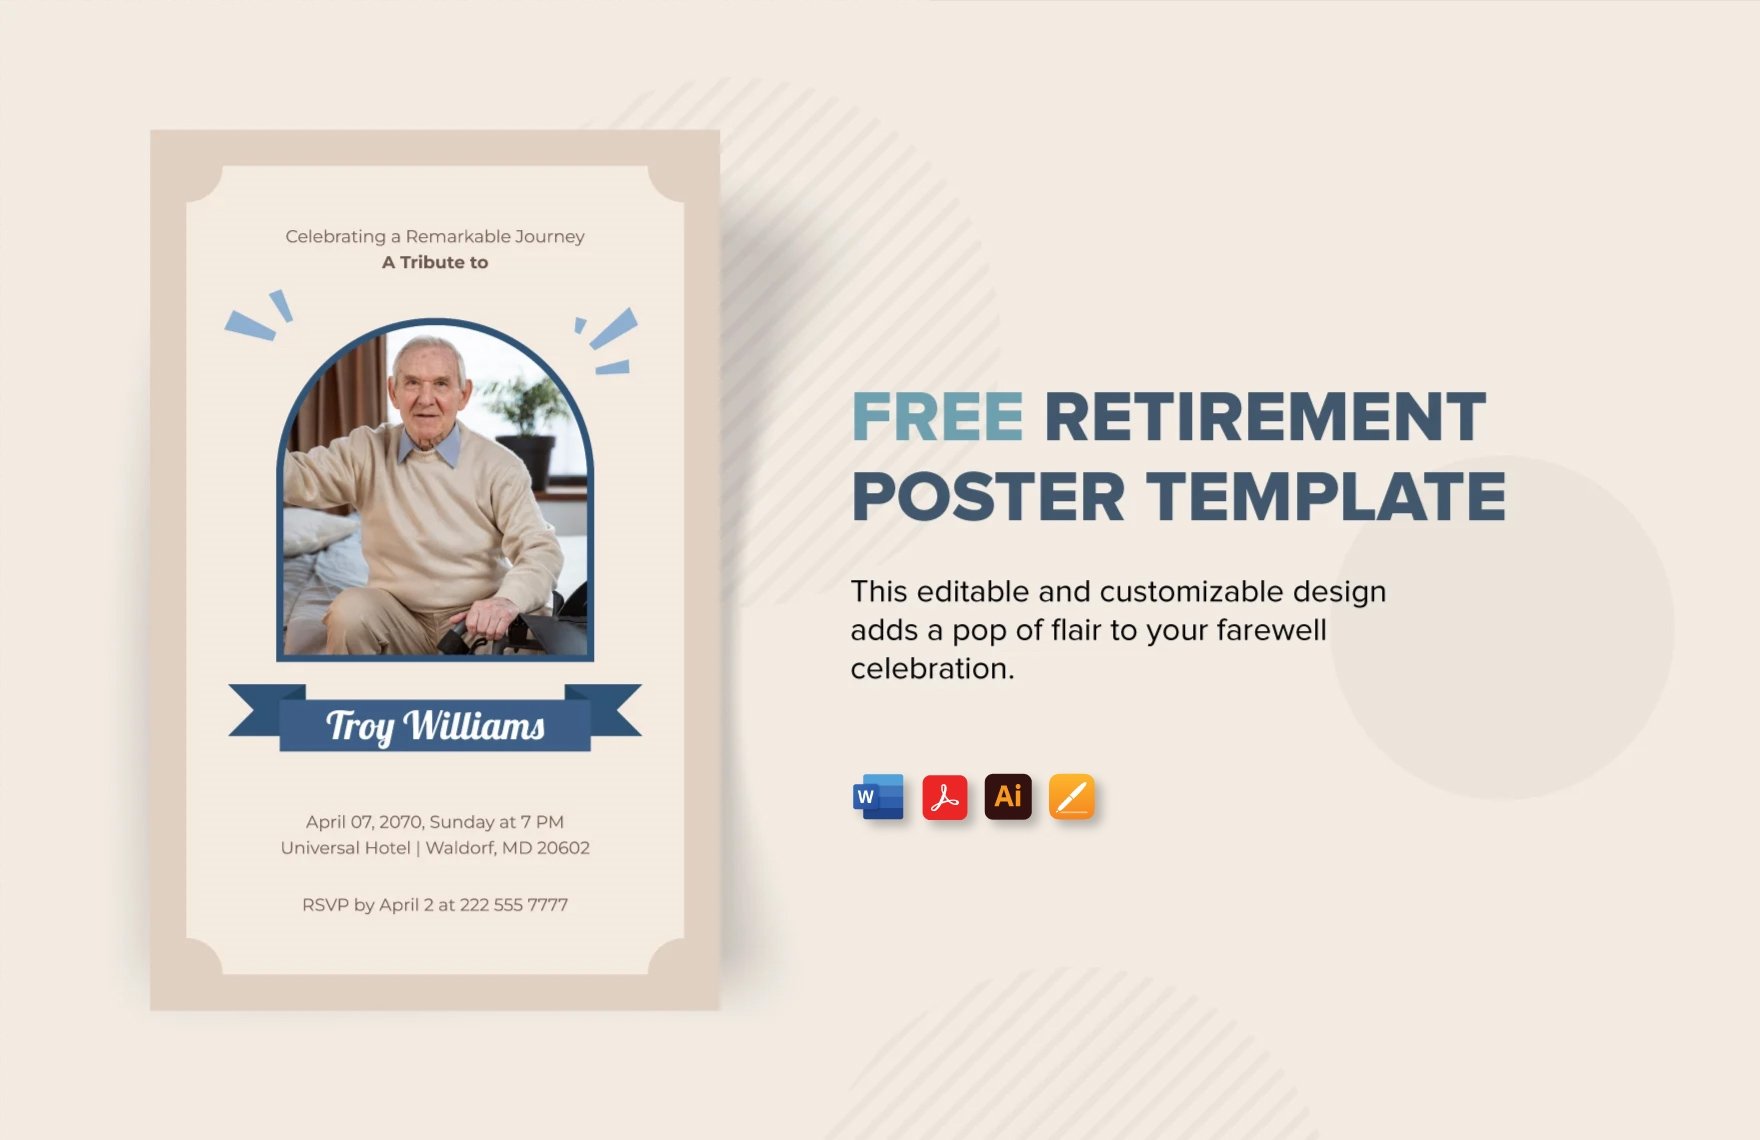 Free Retirement Poster Template in Word, PDF, Illustrator, Apple Pages